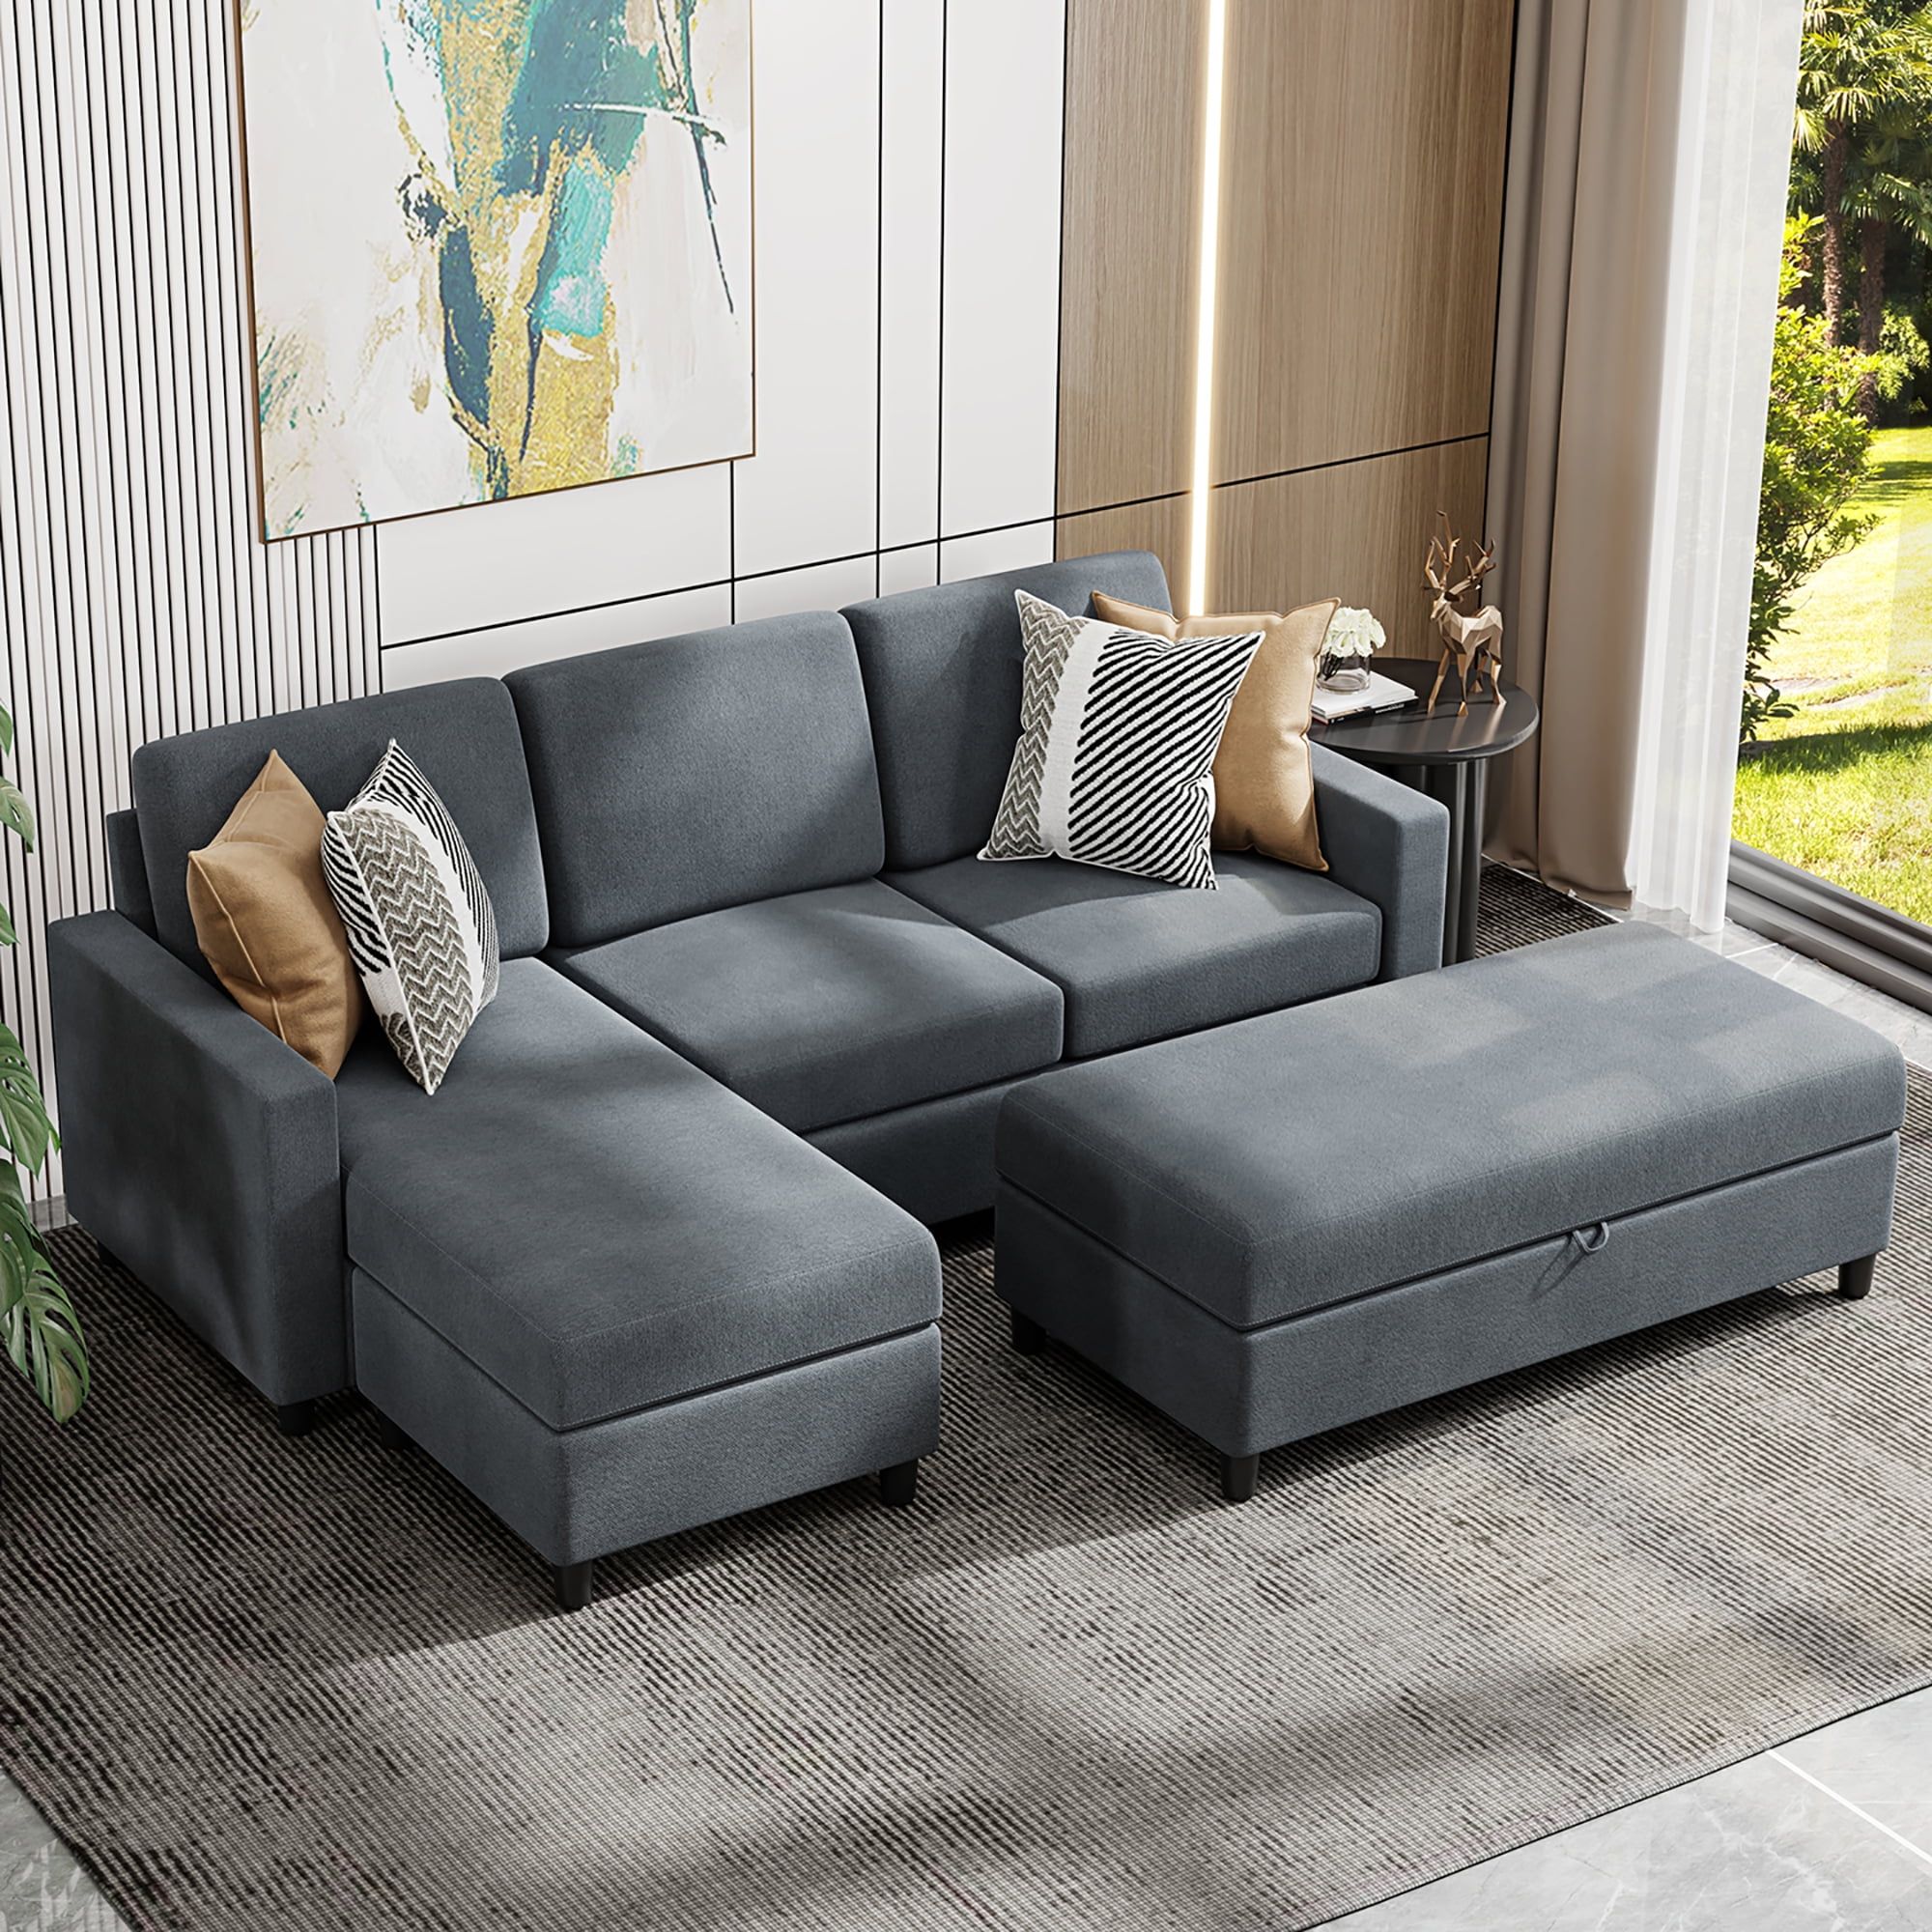 Convertible Sectional Sofa Couch With Storage Ottoman, L Shaped Wide Reversible  Chaise With Linen Fabric(deep Grey) – Walmart With Regard To Reversible Sectional Sofas (Photo 1 of 15)